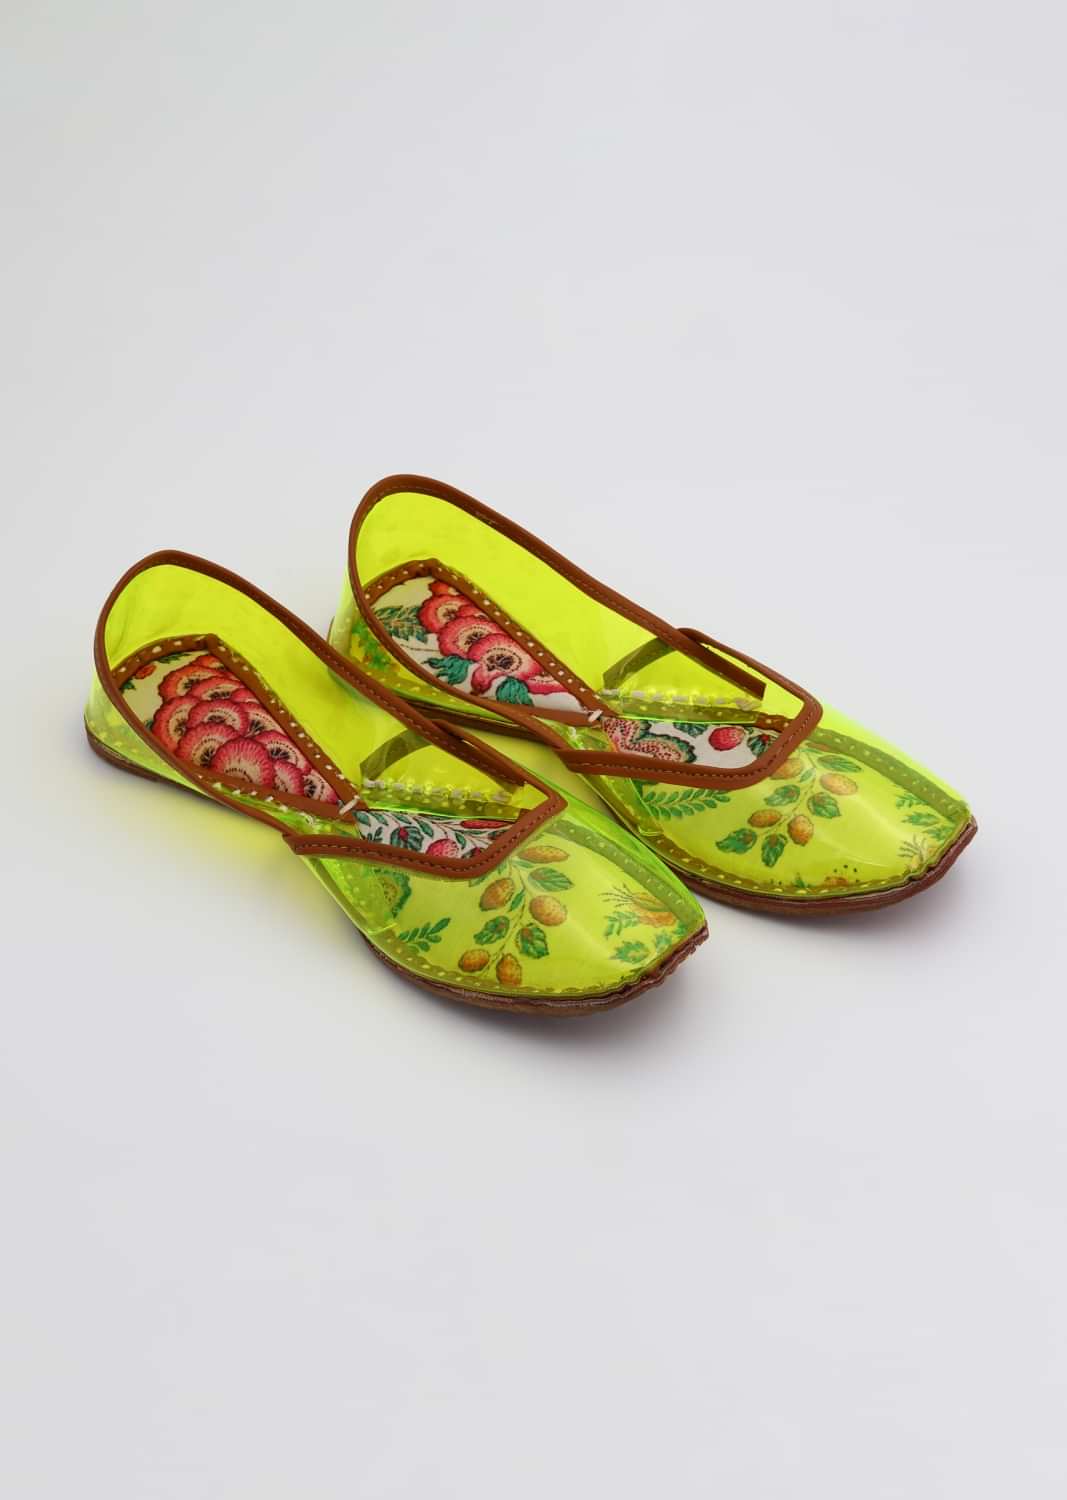 Lime Green Printed Mojris In Vinyl Leather Double Cushioning, Leather Piping